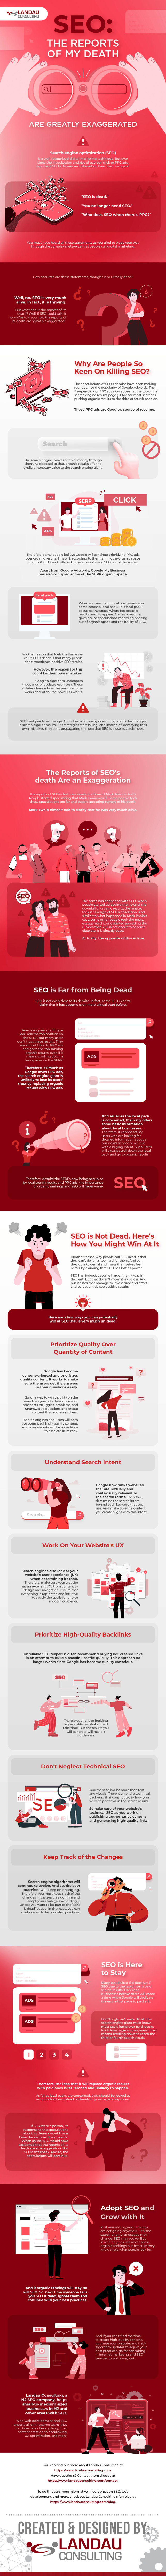 SEO-The-Reports-of-My-Death-Are-Greatly-Exaggerated-Infographic-Image-LC